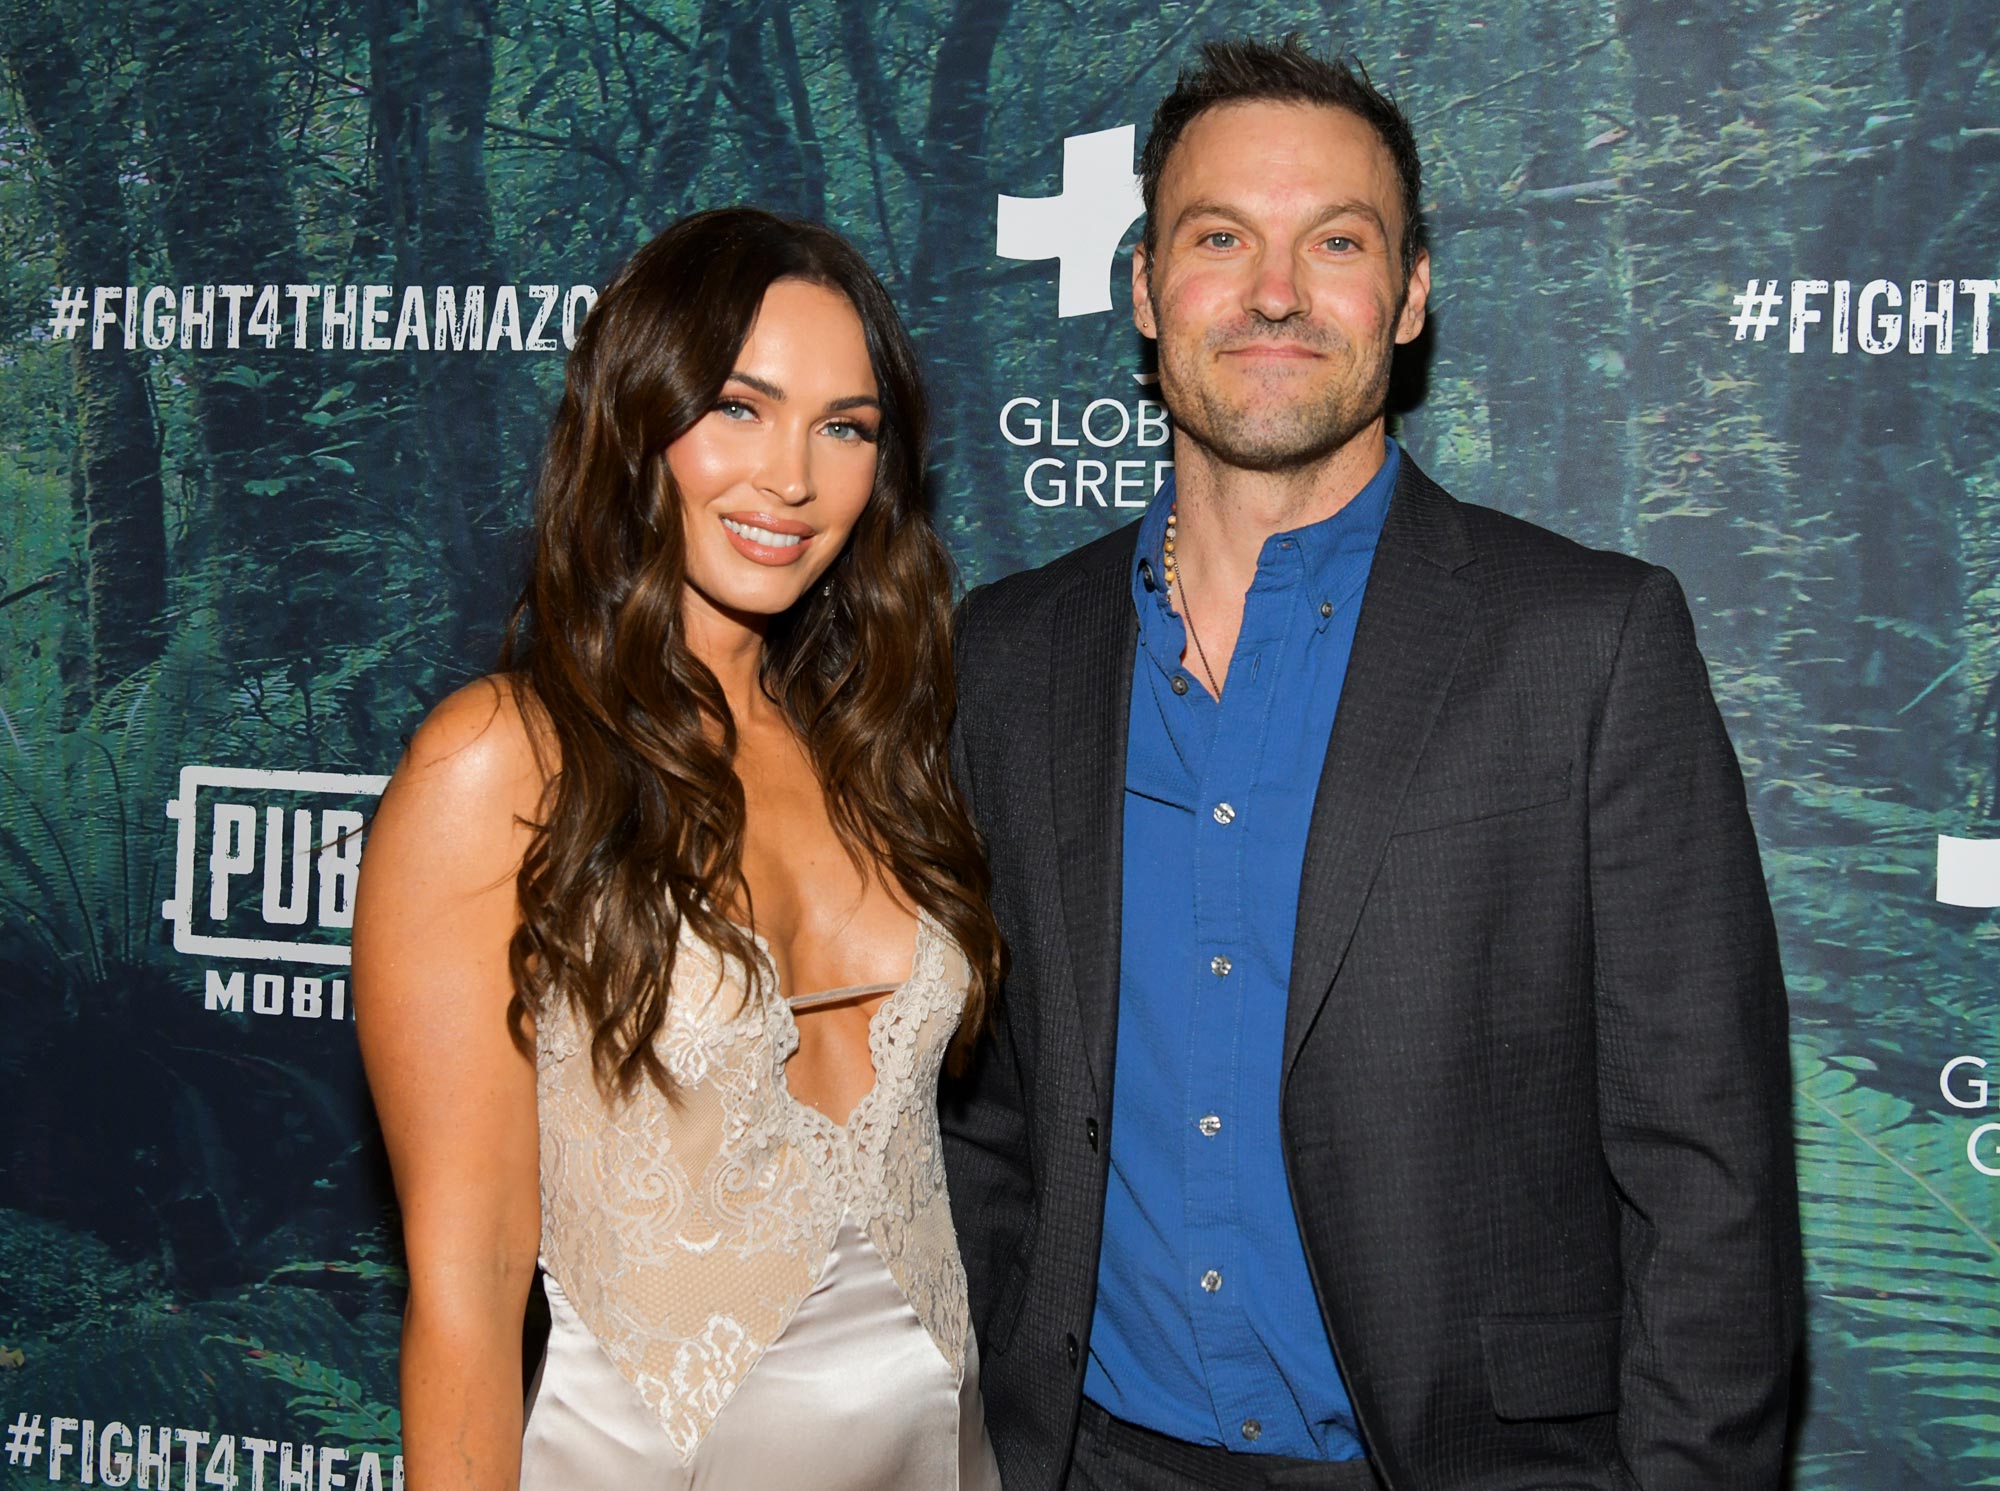 Vanessa Marcil Says Megan Fox Has Apologized to Her, Claims She Was Groomed by Brian Austin Green 234